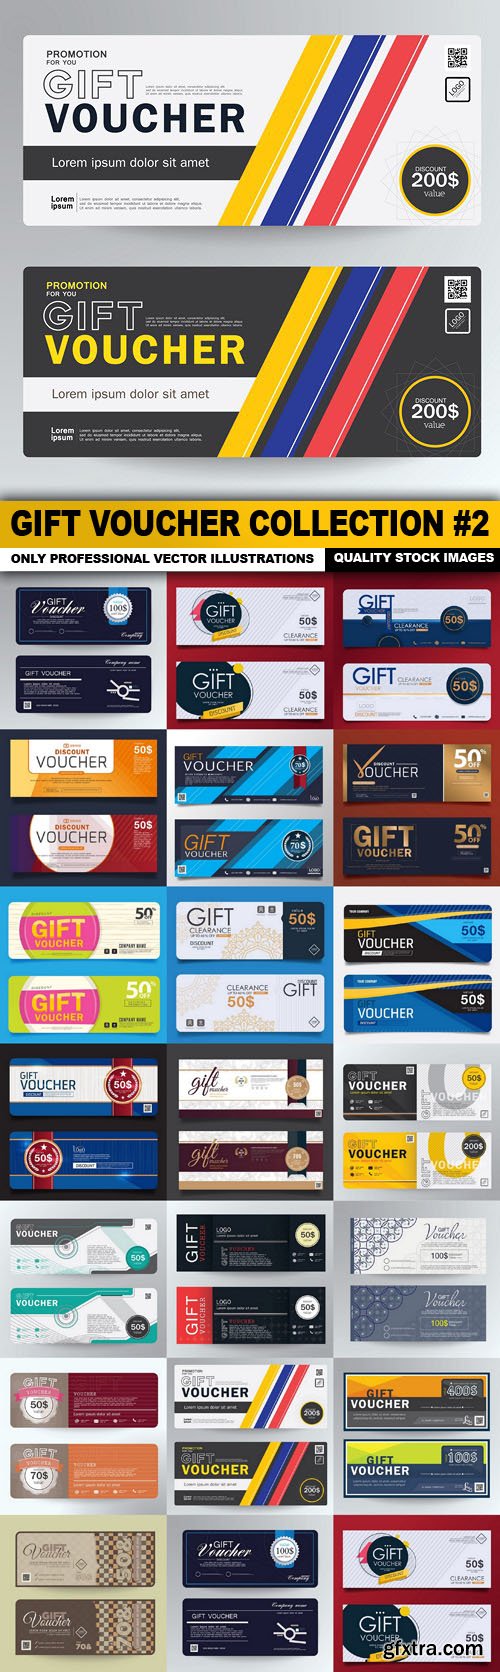 Gift Voucher Collection #2 - 20 Vector